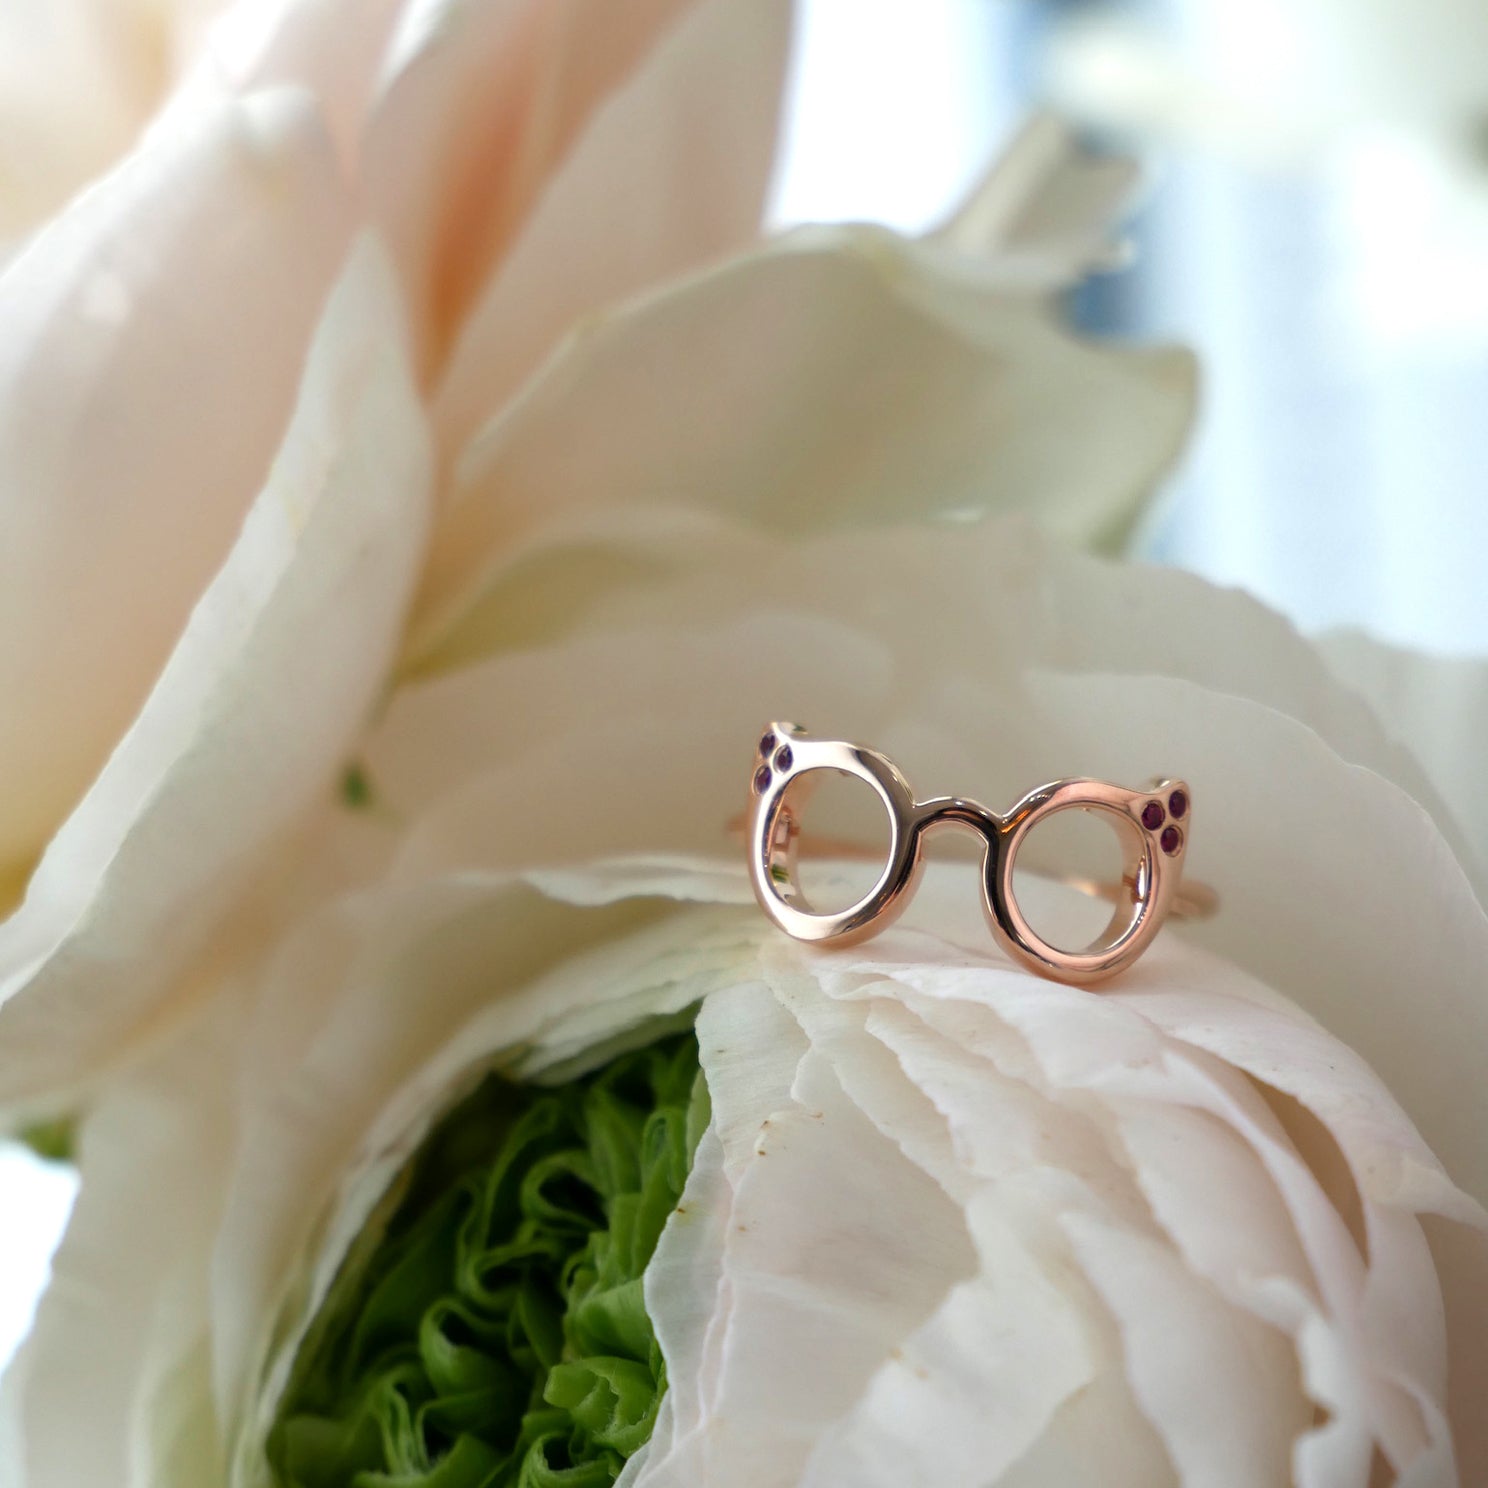 Evan's Sunnies Ring with Rubies in 14k rose gold on top of white flower